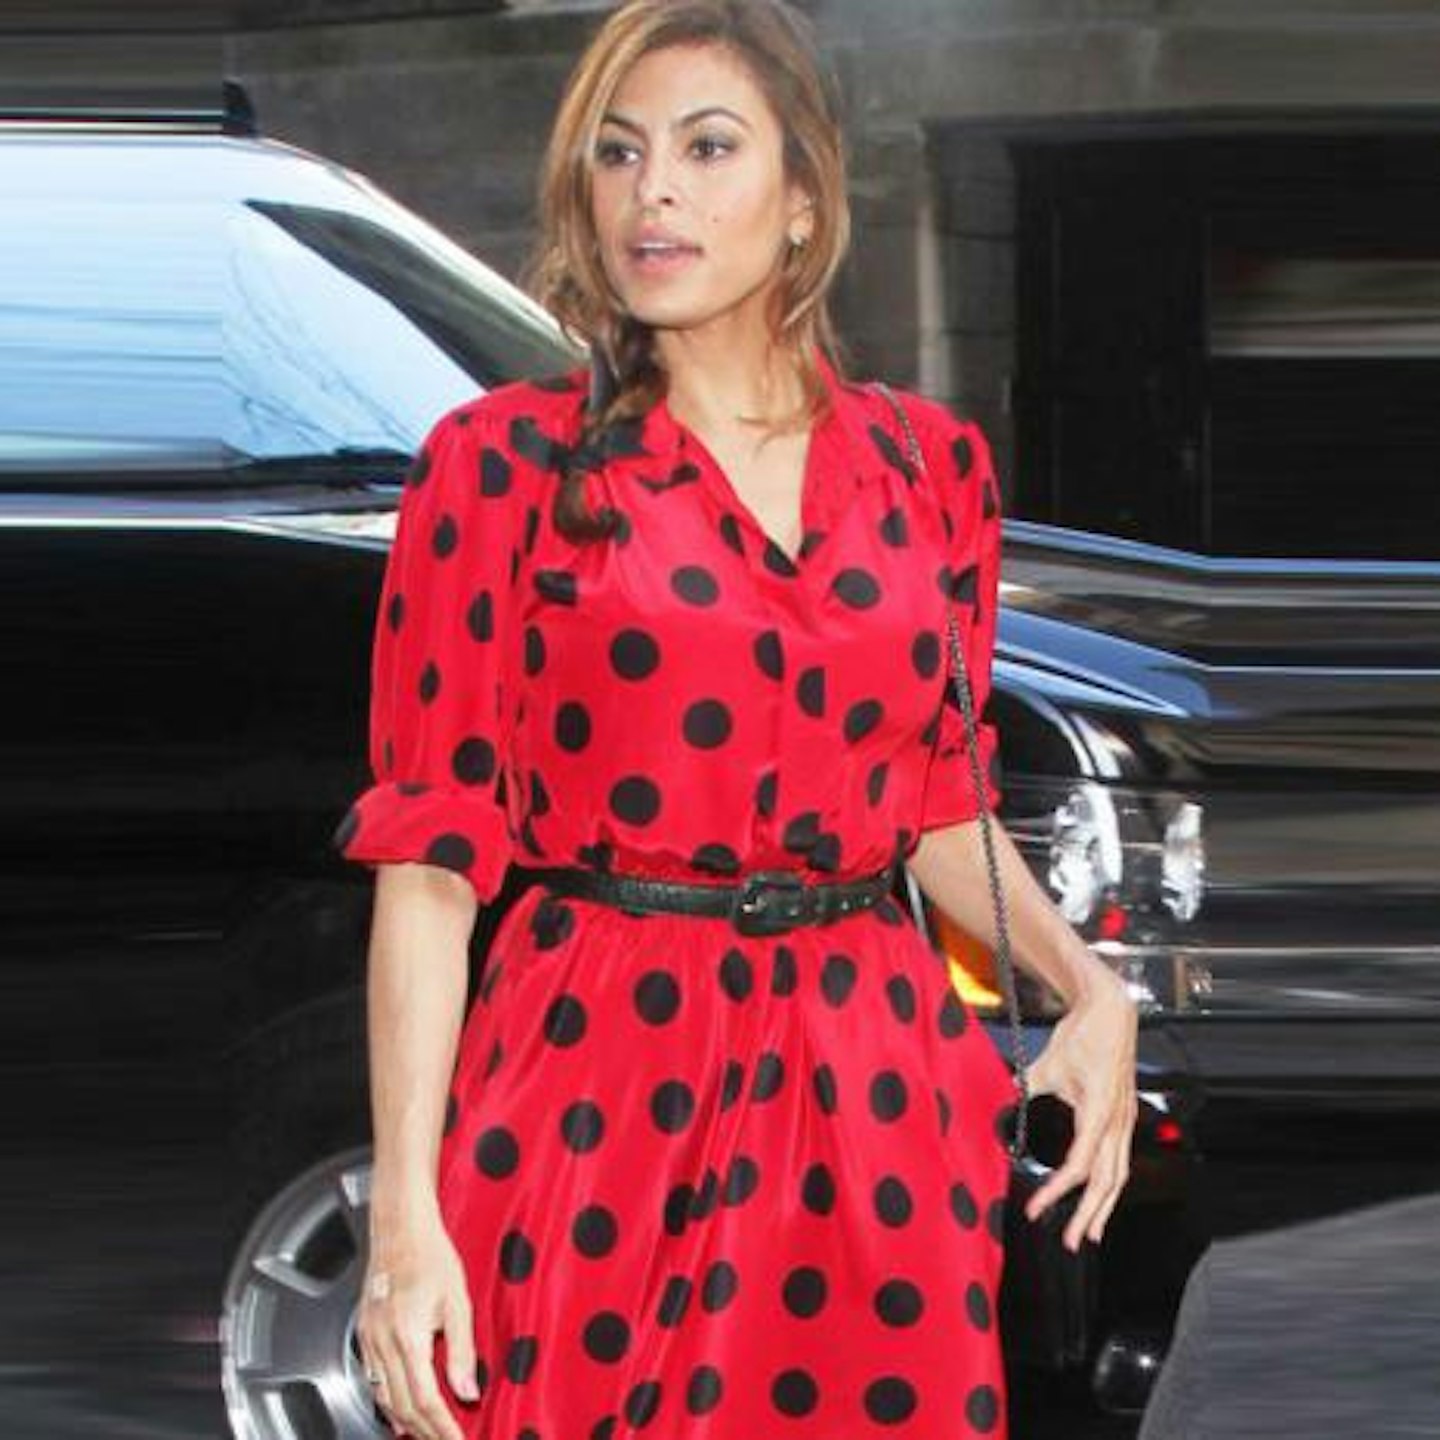 We think Eva Mendes looks just right (but we definitely prefer her curvy look!)